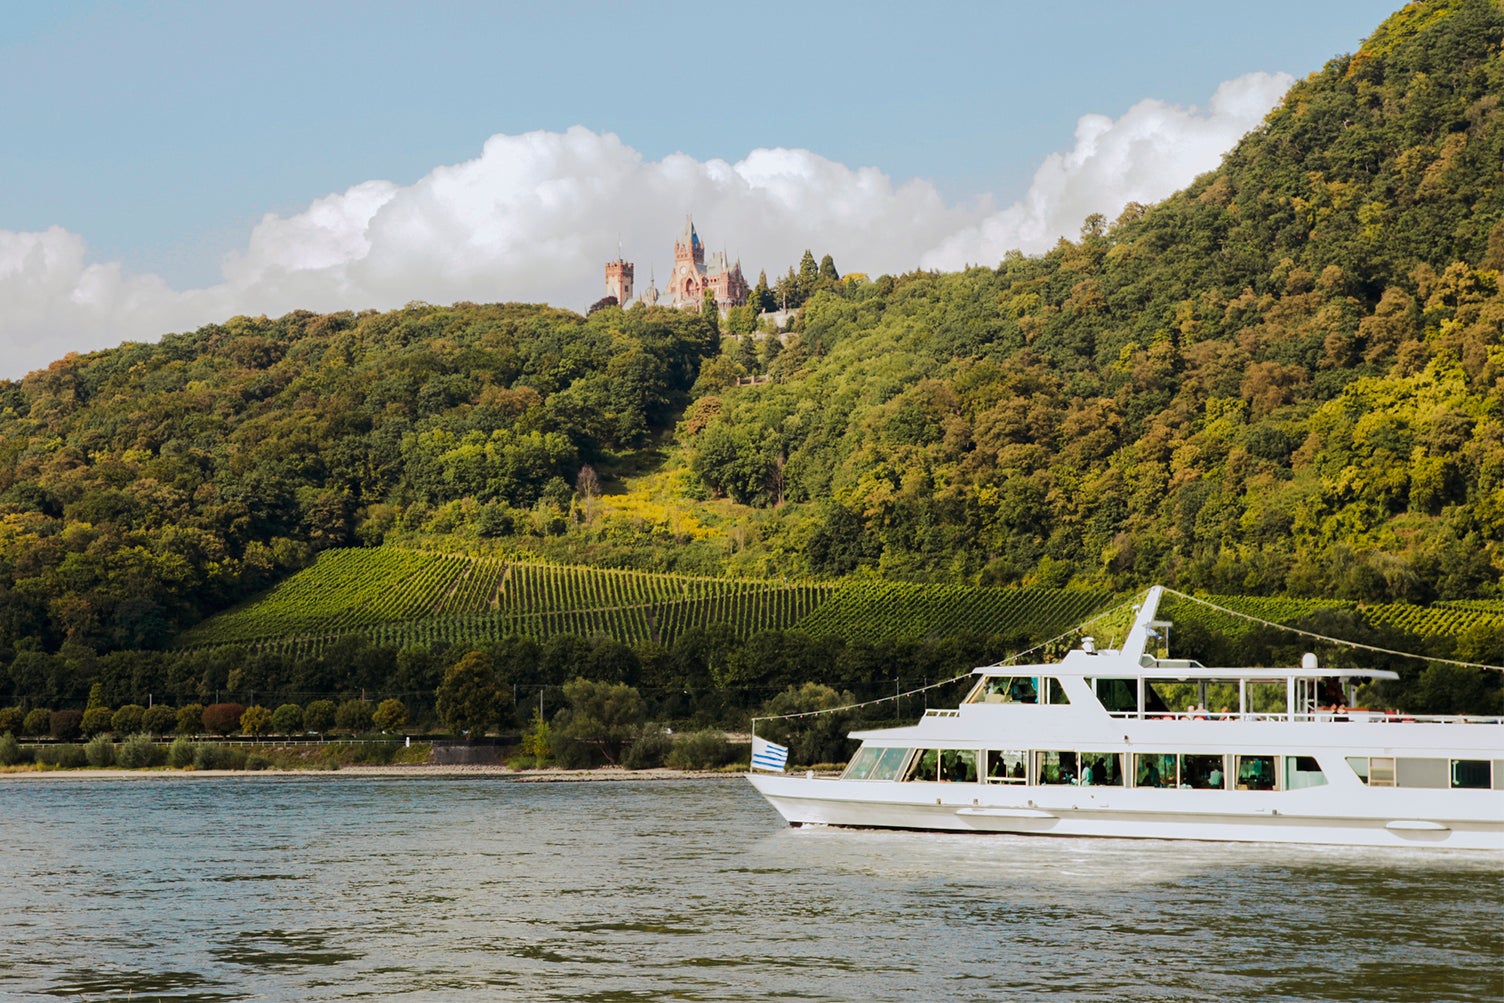 A river cruise boat sailing into the frame of the photo along the Rhine with green hills in the background